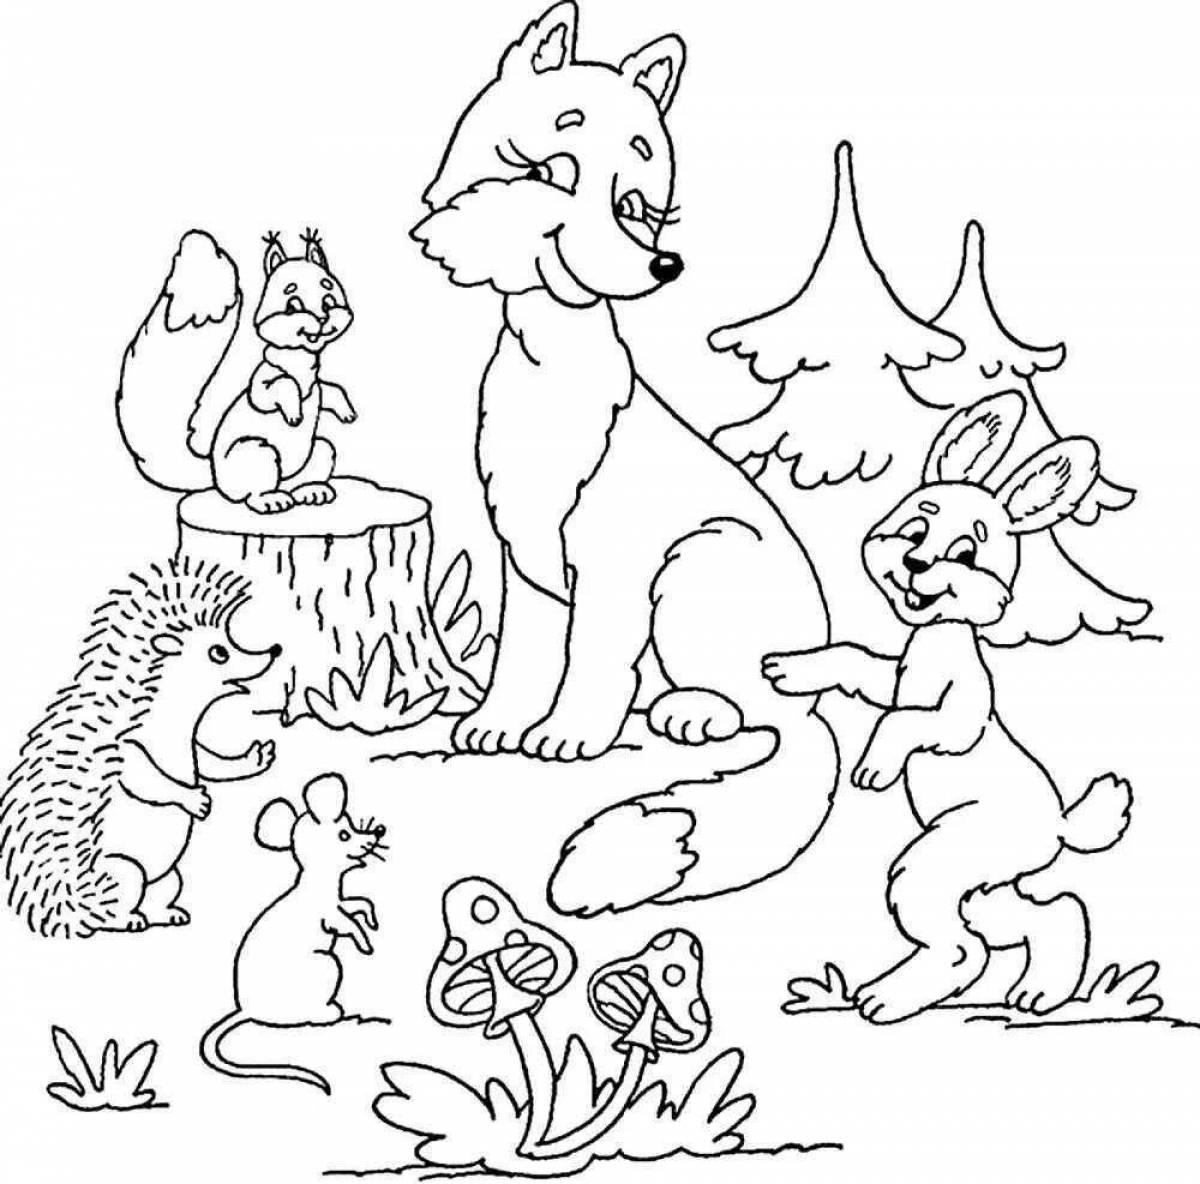 Fun forest animal coloring pages for kids